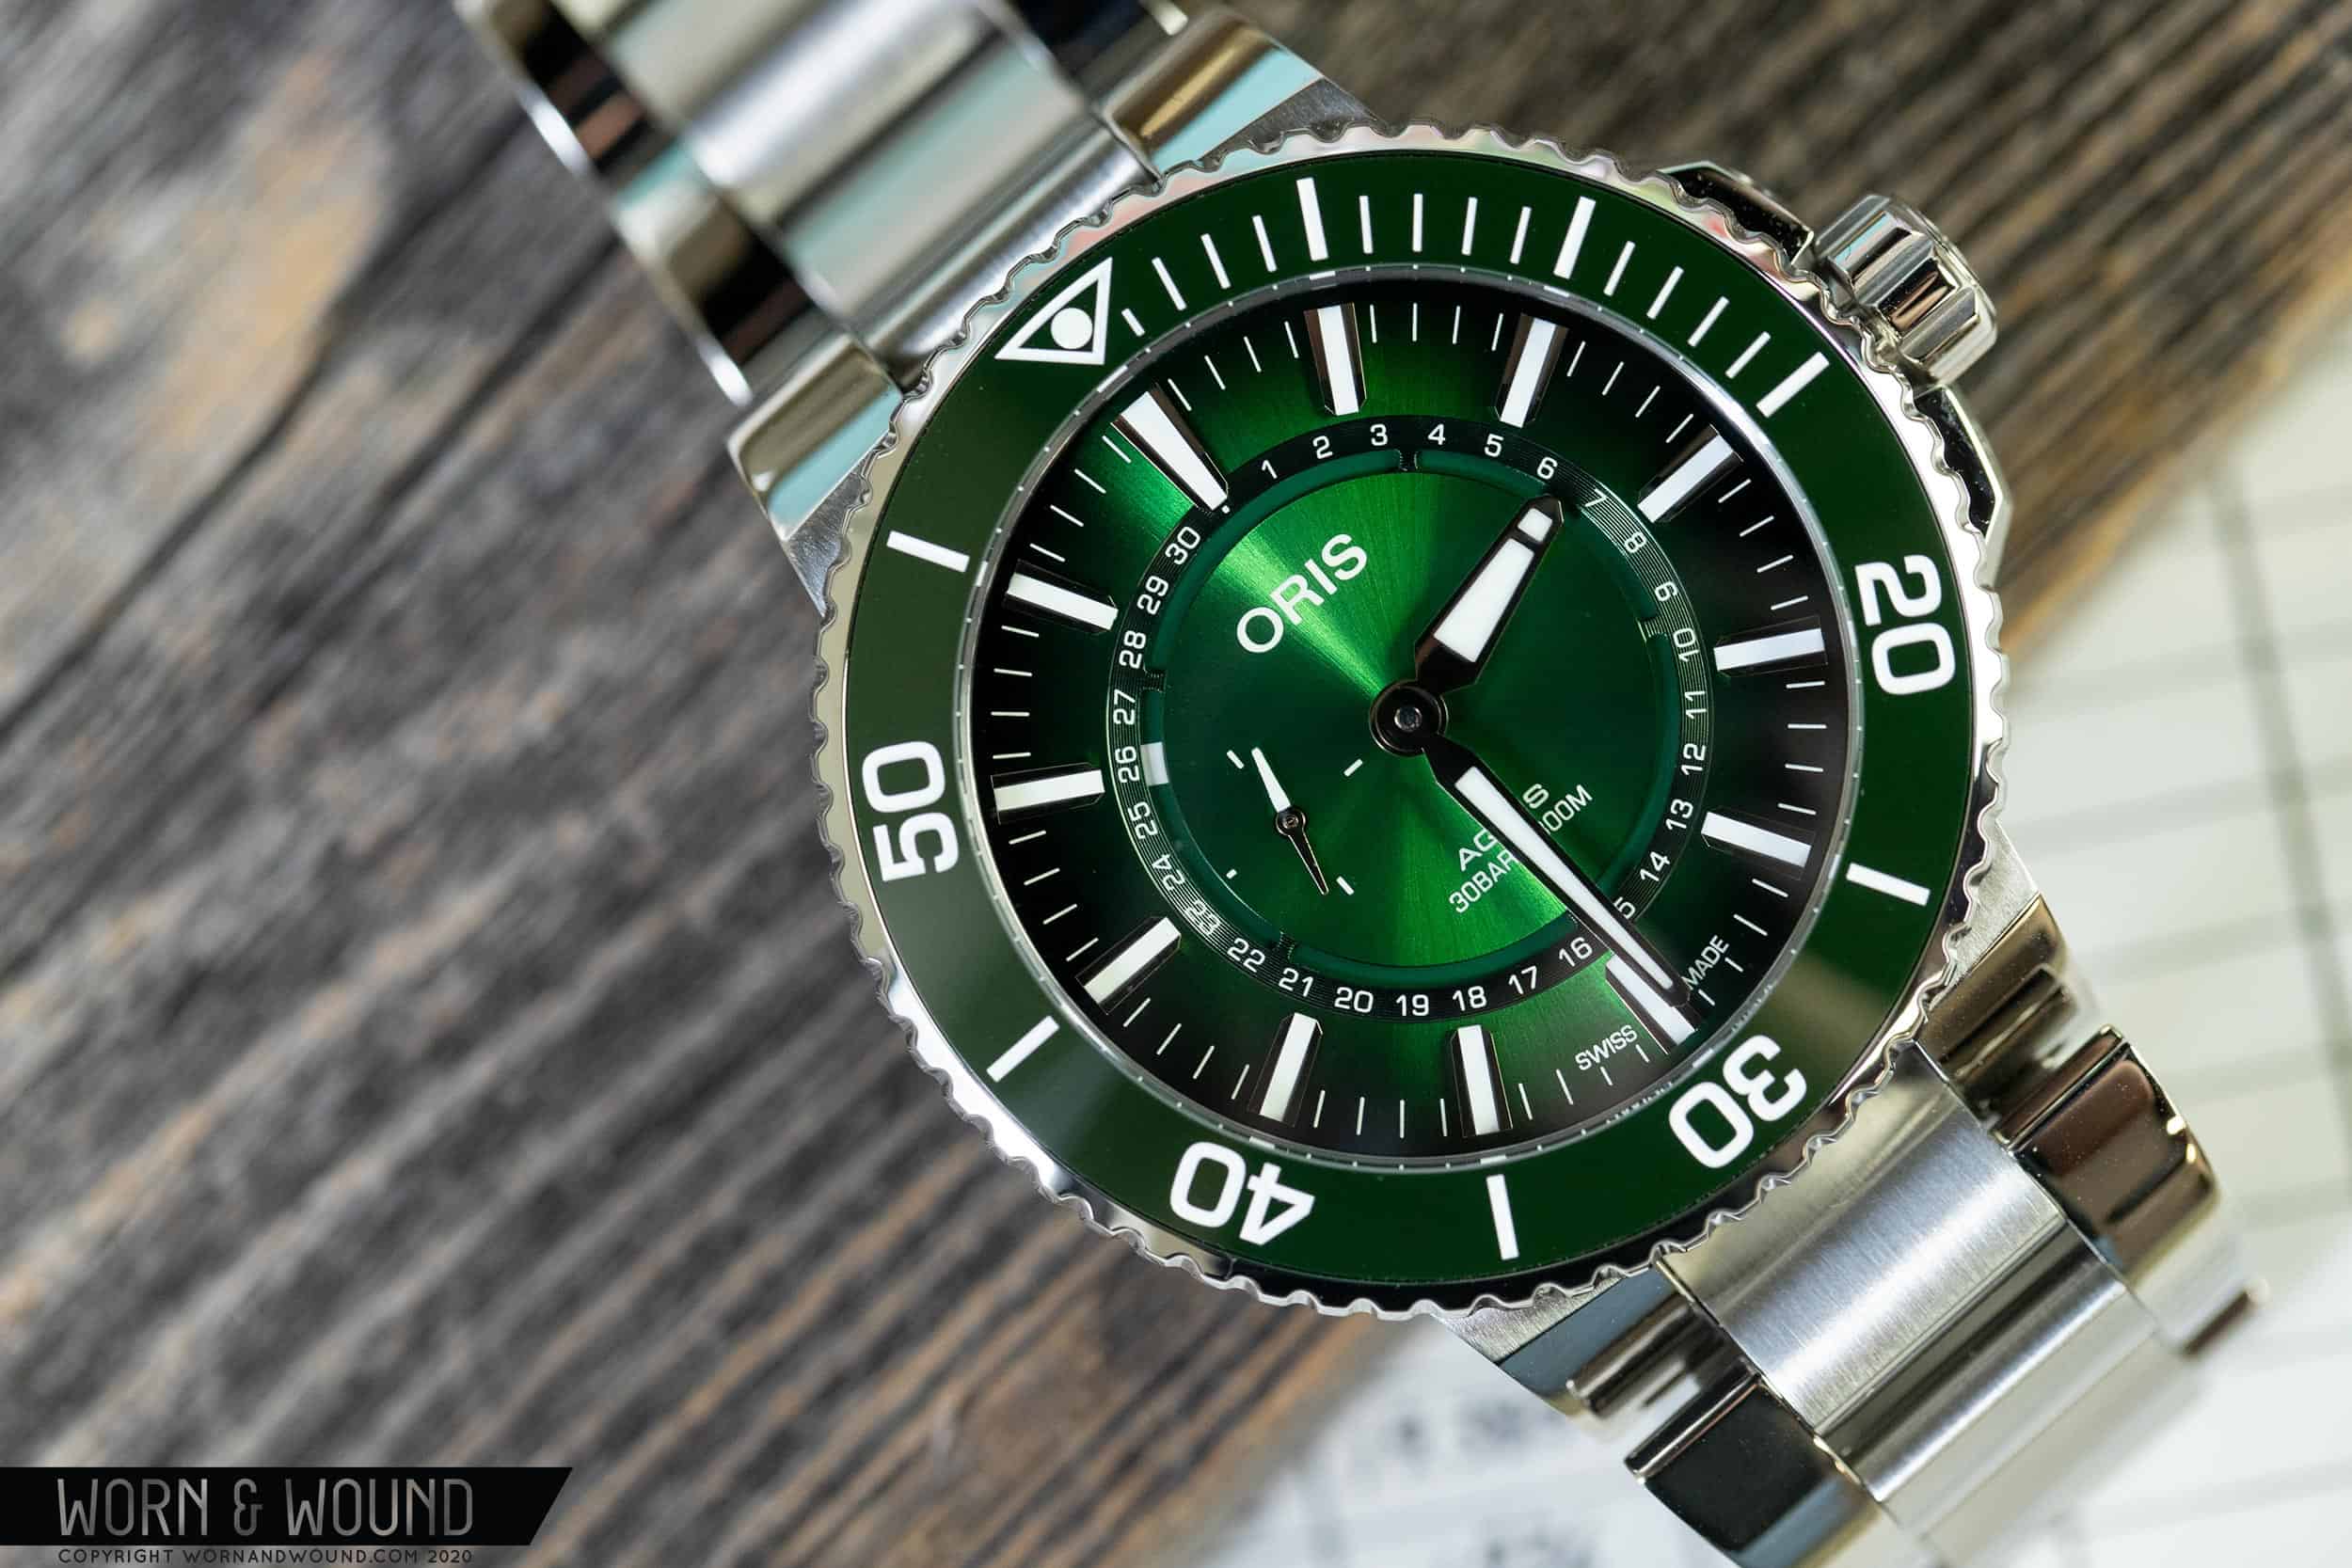 Introducing the Oris Hangang Limited Edition, a Green Dialed Aquis for a Good Cause